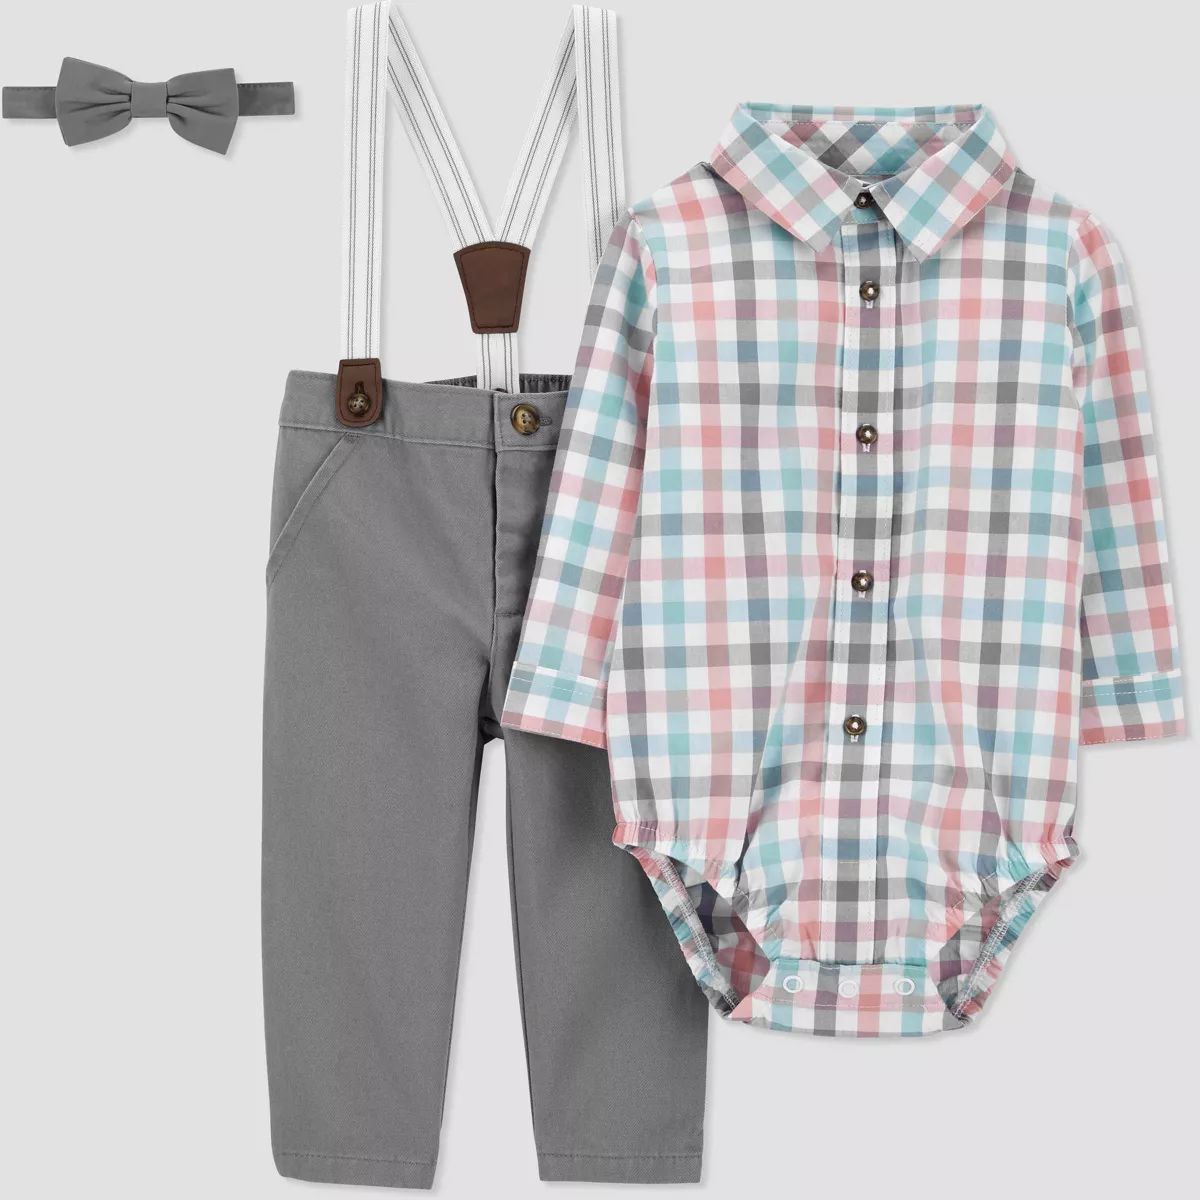 Carter's Just One You® Toddler Boys' Plaid Top & Bottom Set - Pink/Gray/Blue | Target